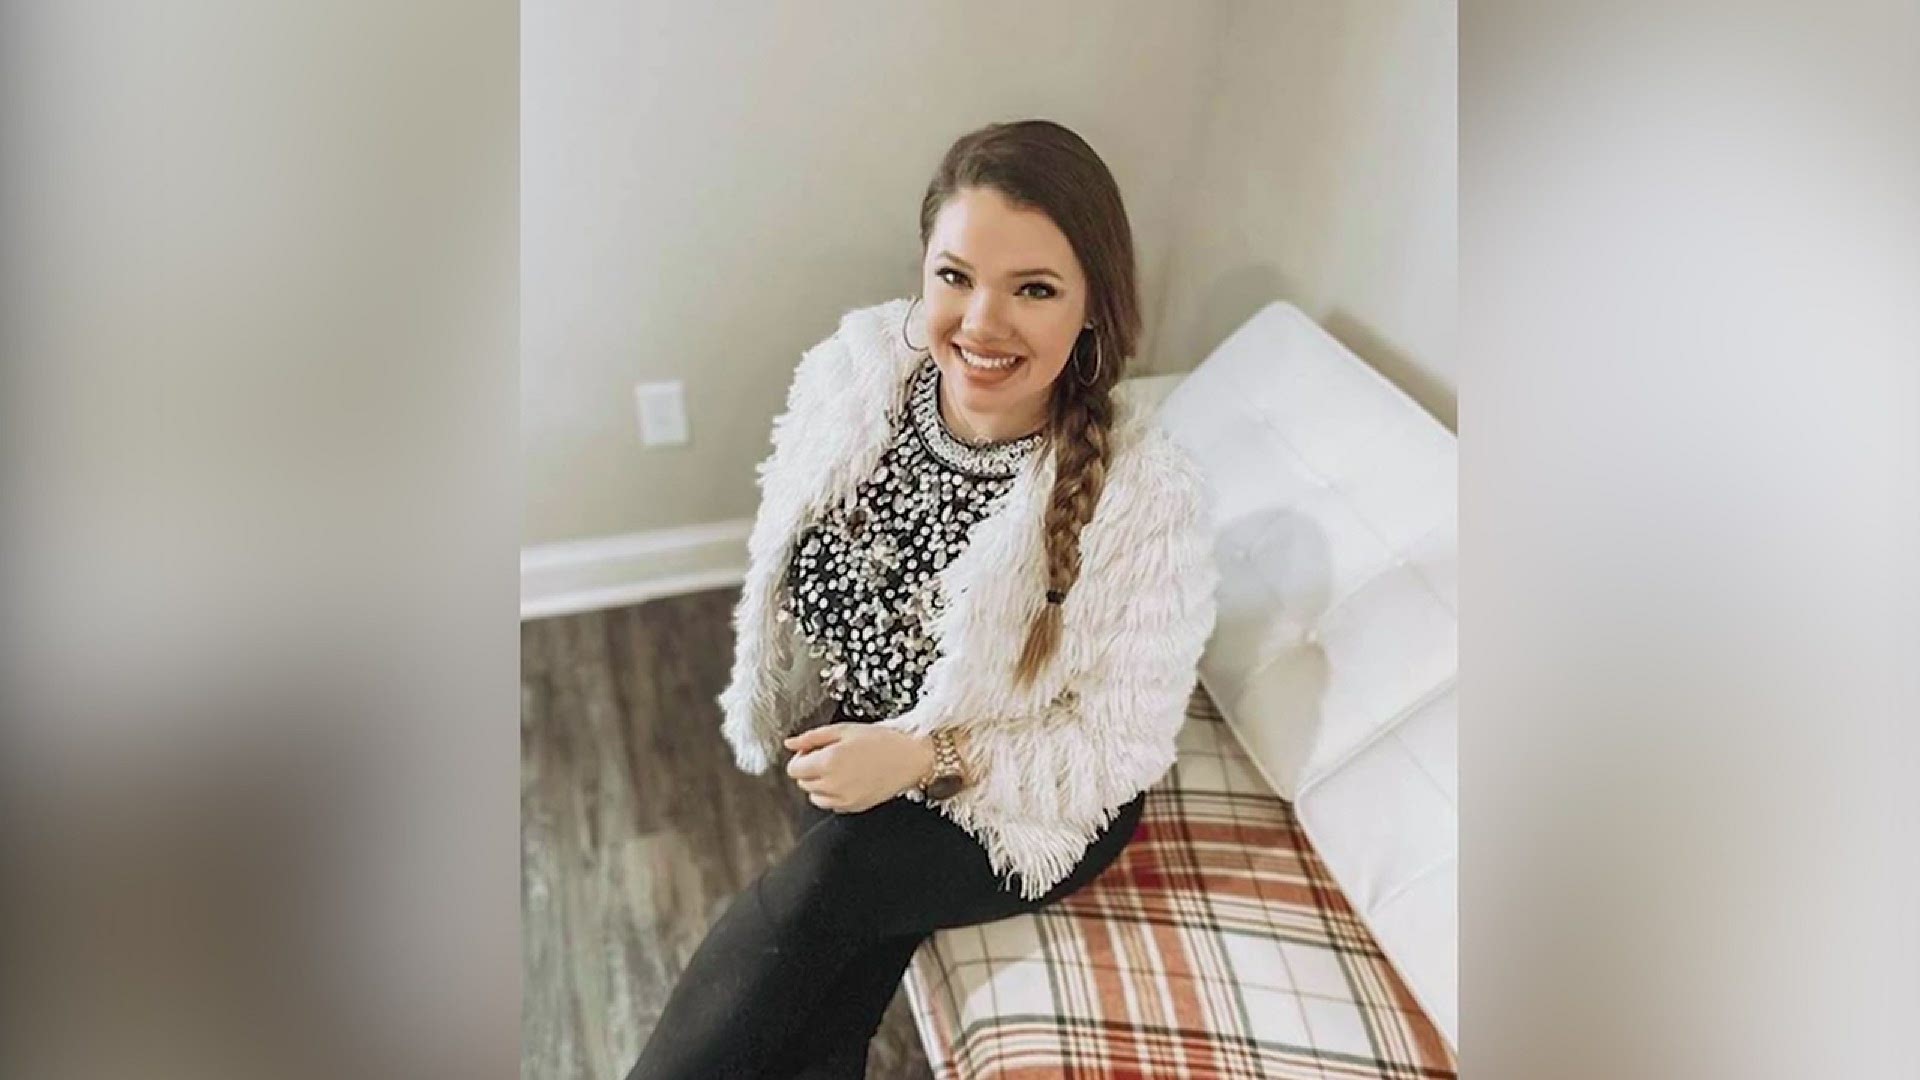 Madeline Taylor was a healthy, happy 21-year-old mother. After beating COVID-19, she fully recovered. Only to die months later of a stroke, believed caused by COVID.